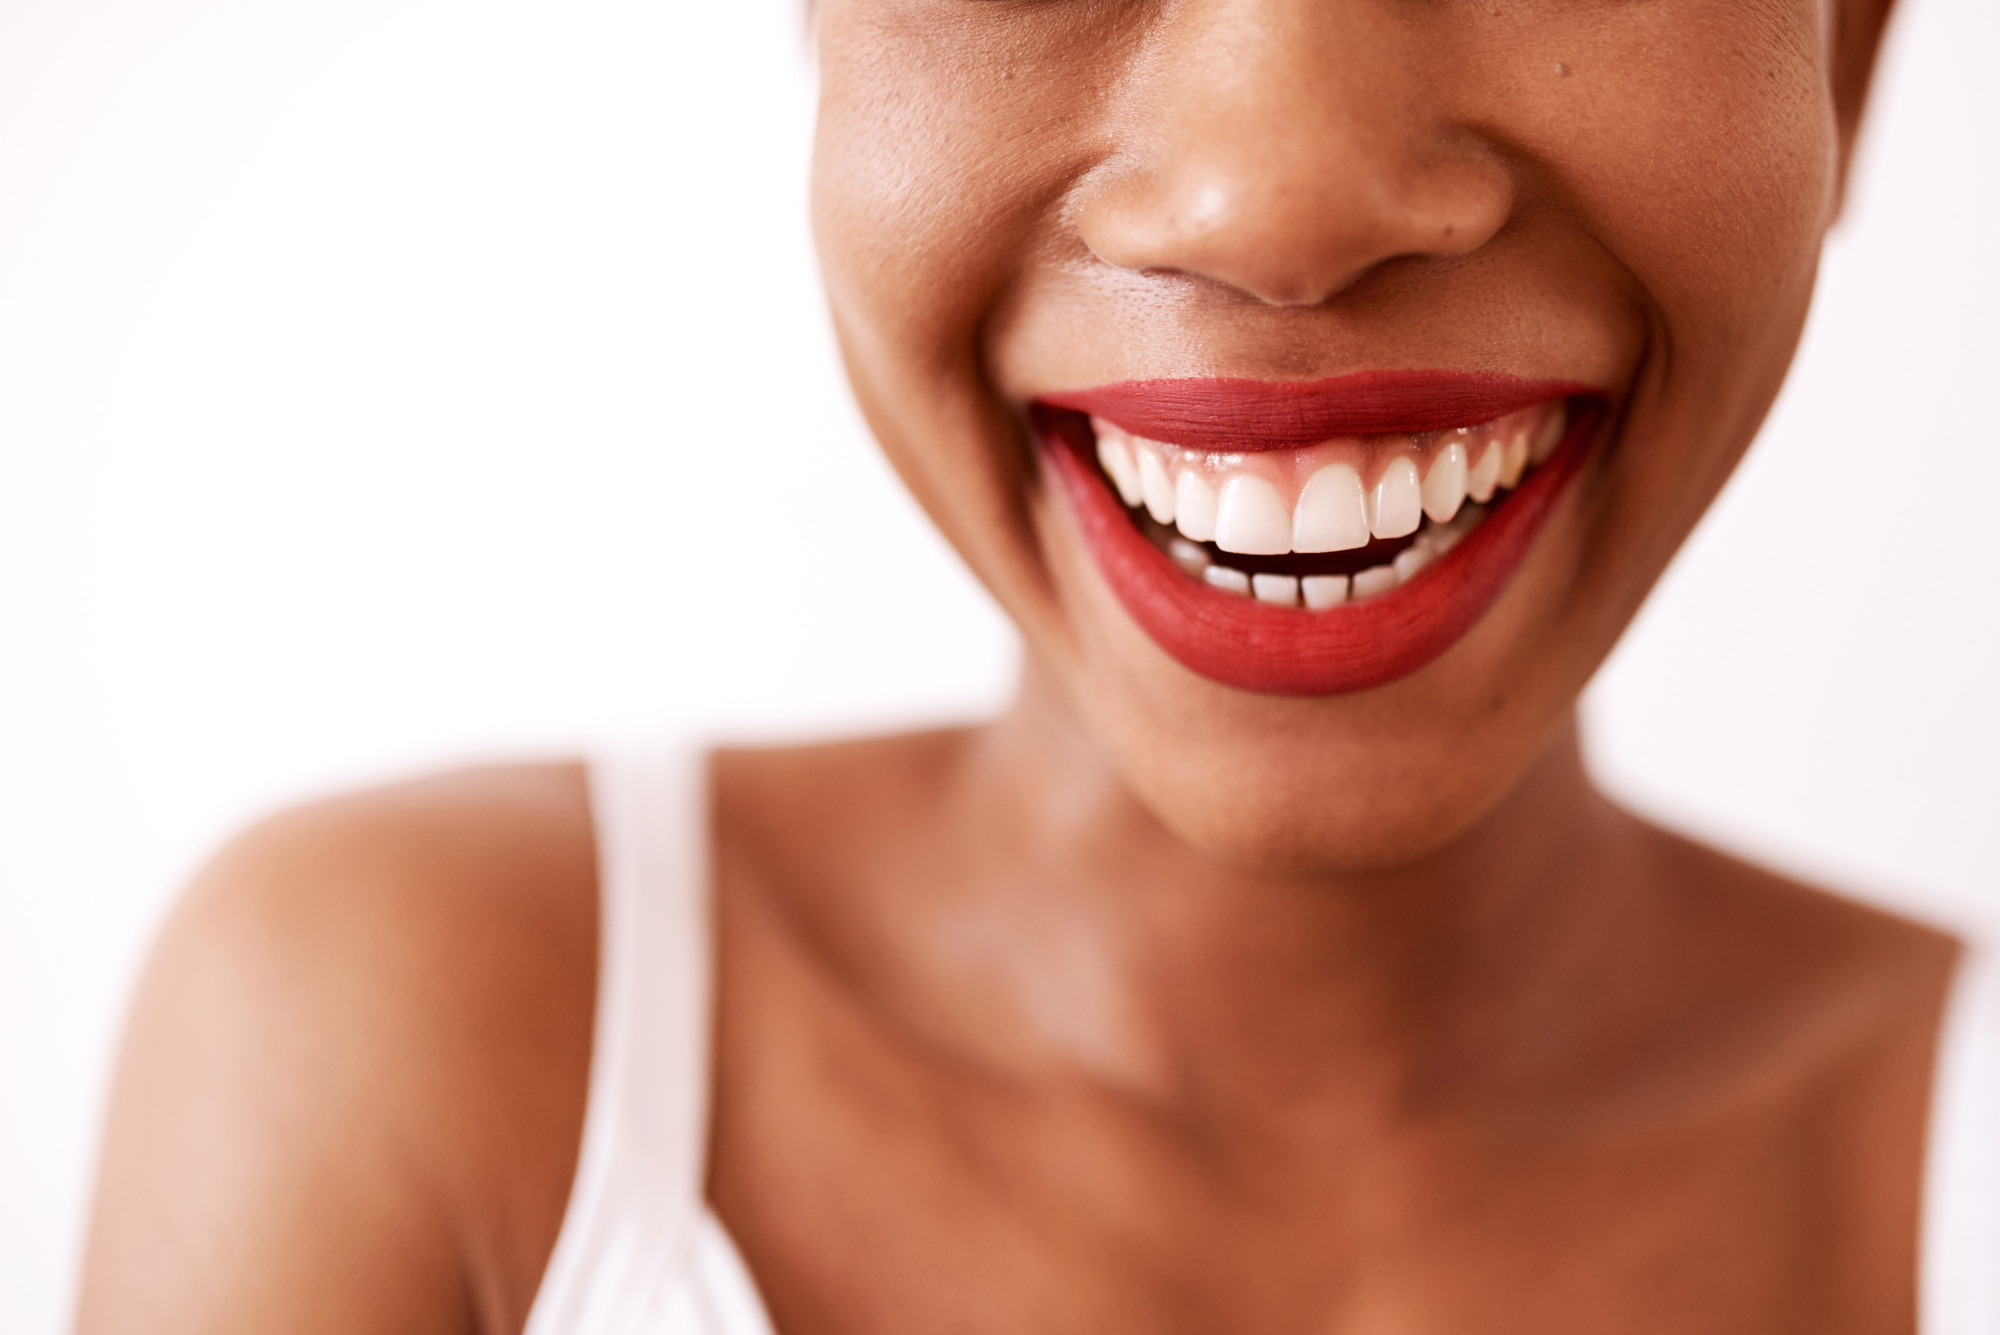 close up of black woman's smile with dental veneers and red lipstick